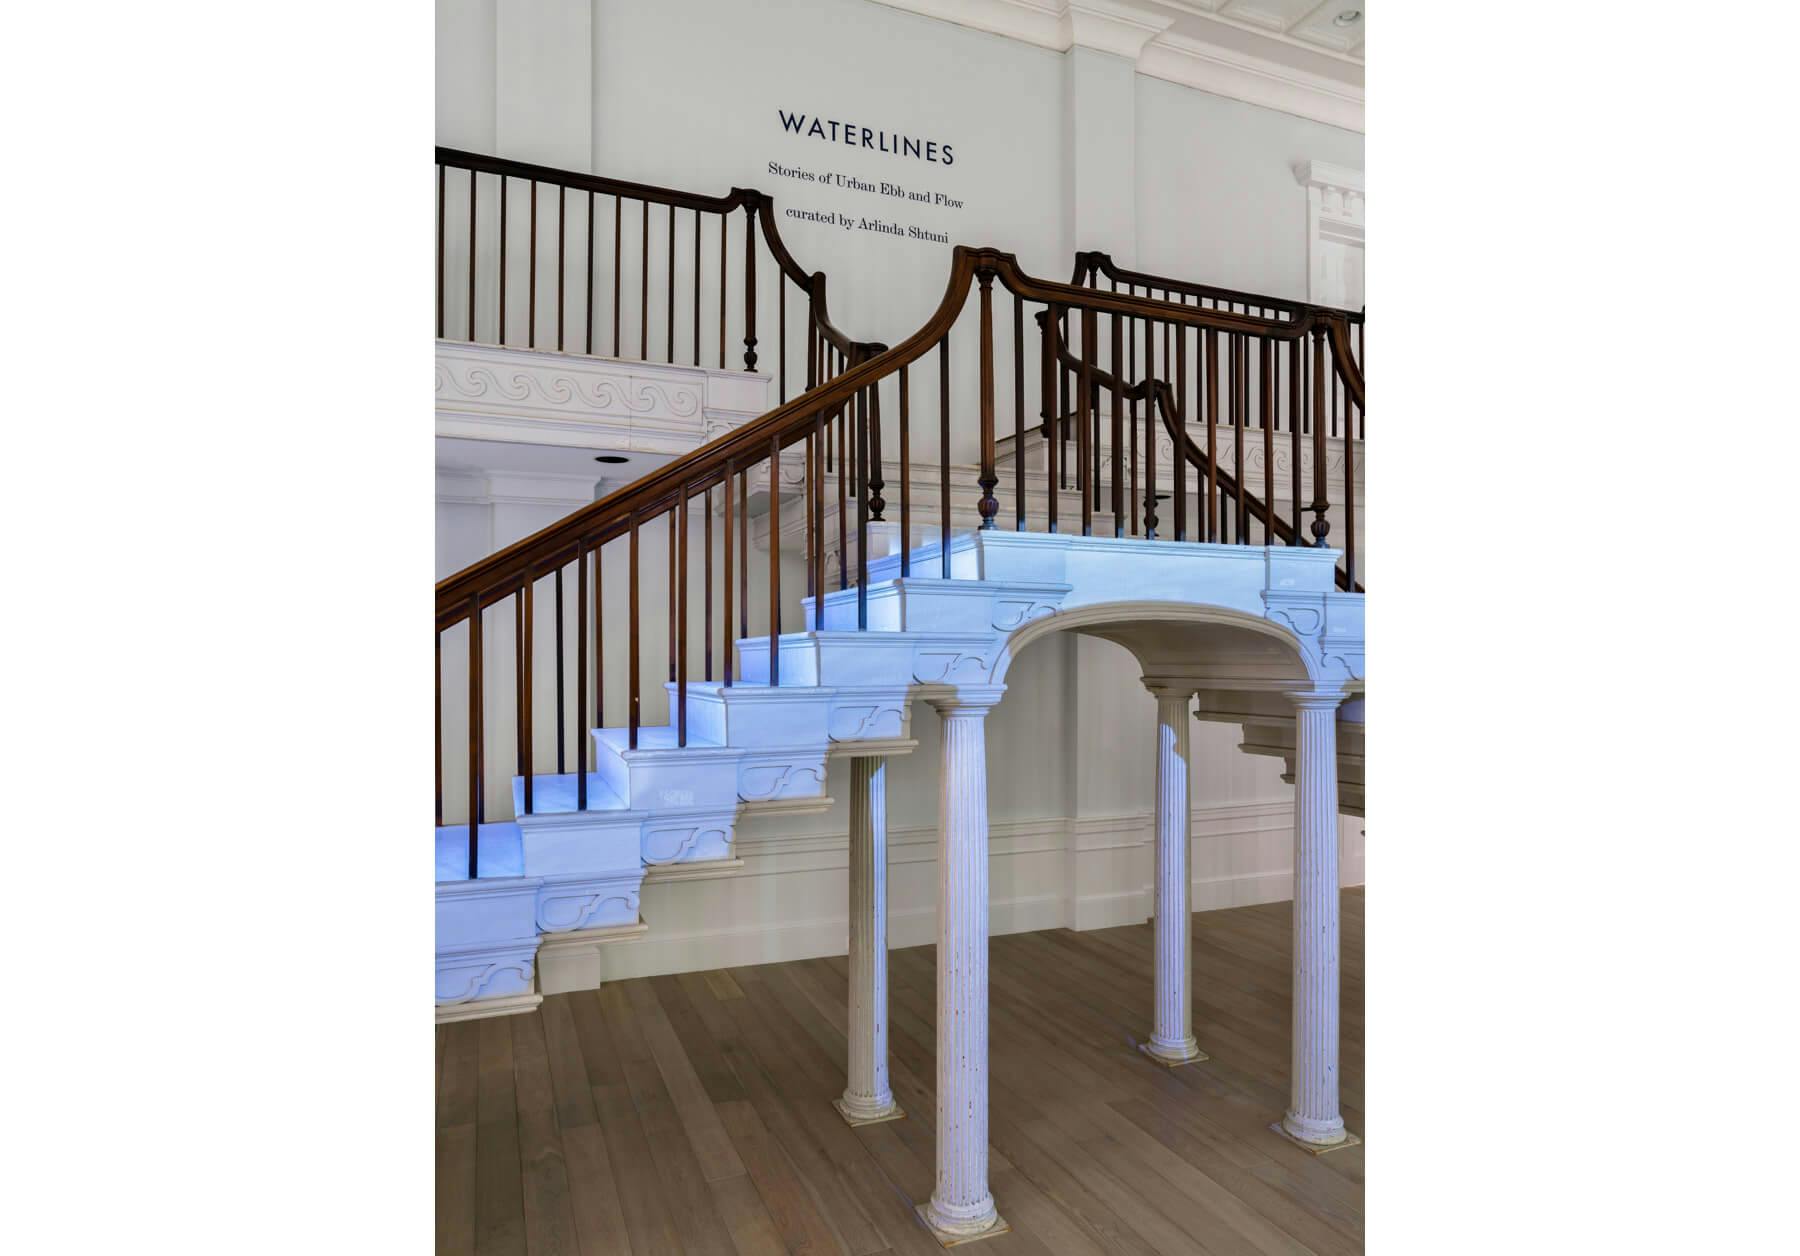 The museum’s centerpiece is a 1792 flying double staircase designed by Charles Bulfinch.